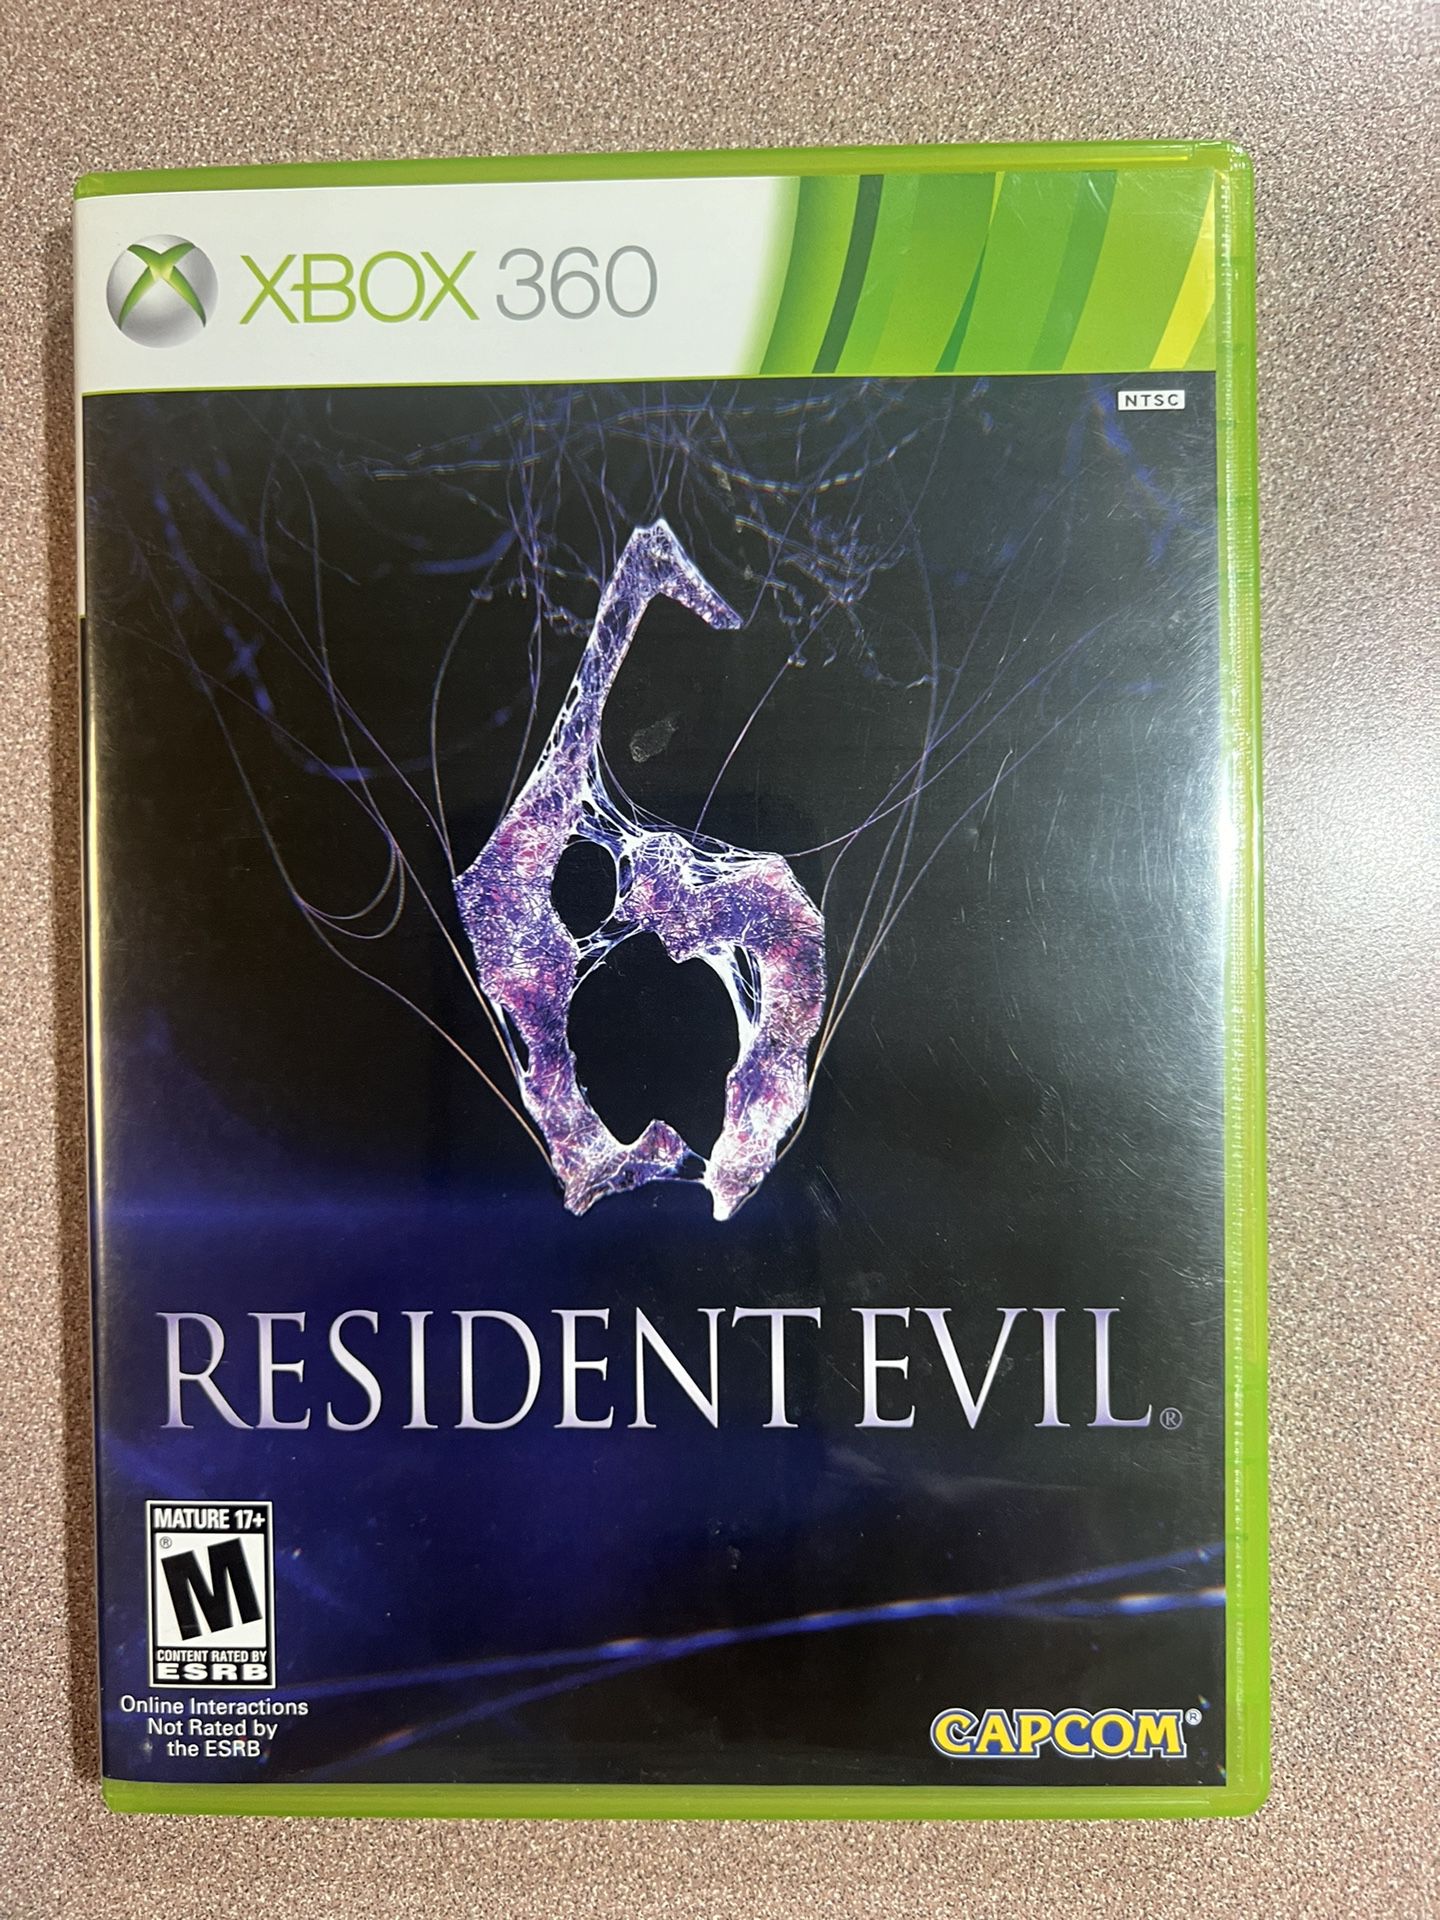 Used Xbox 360 Resident Evil Game